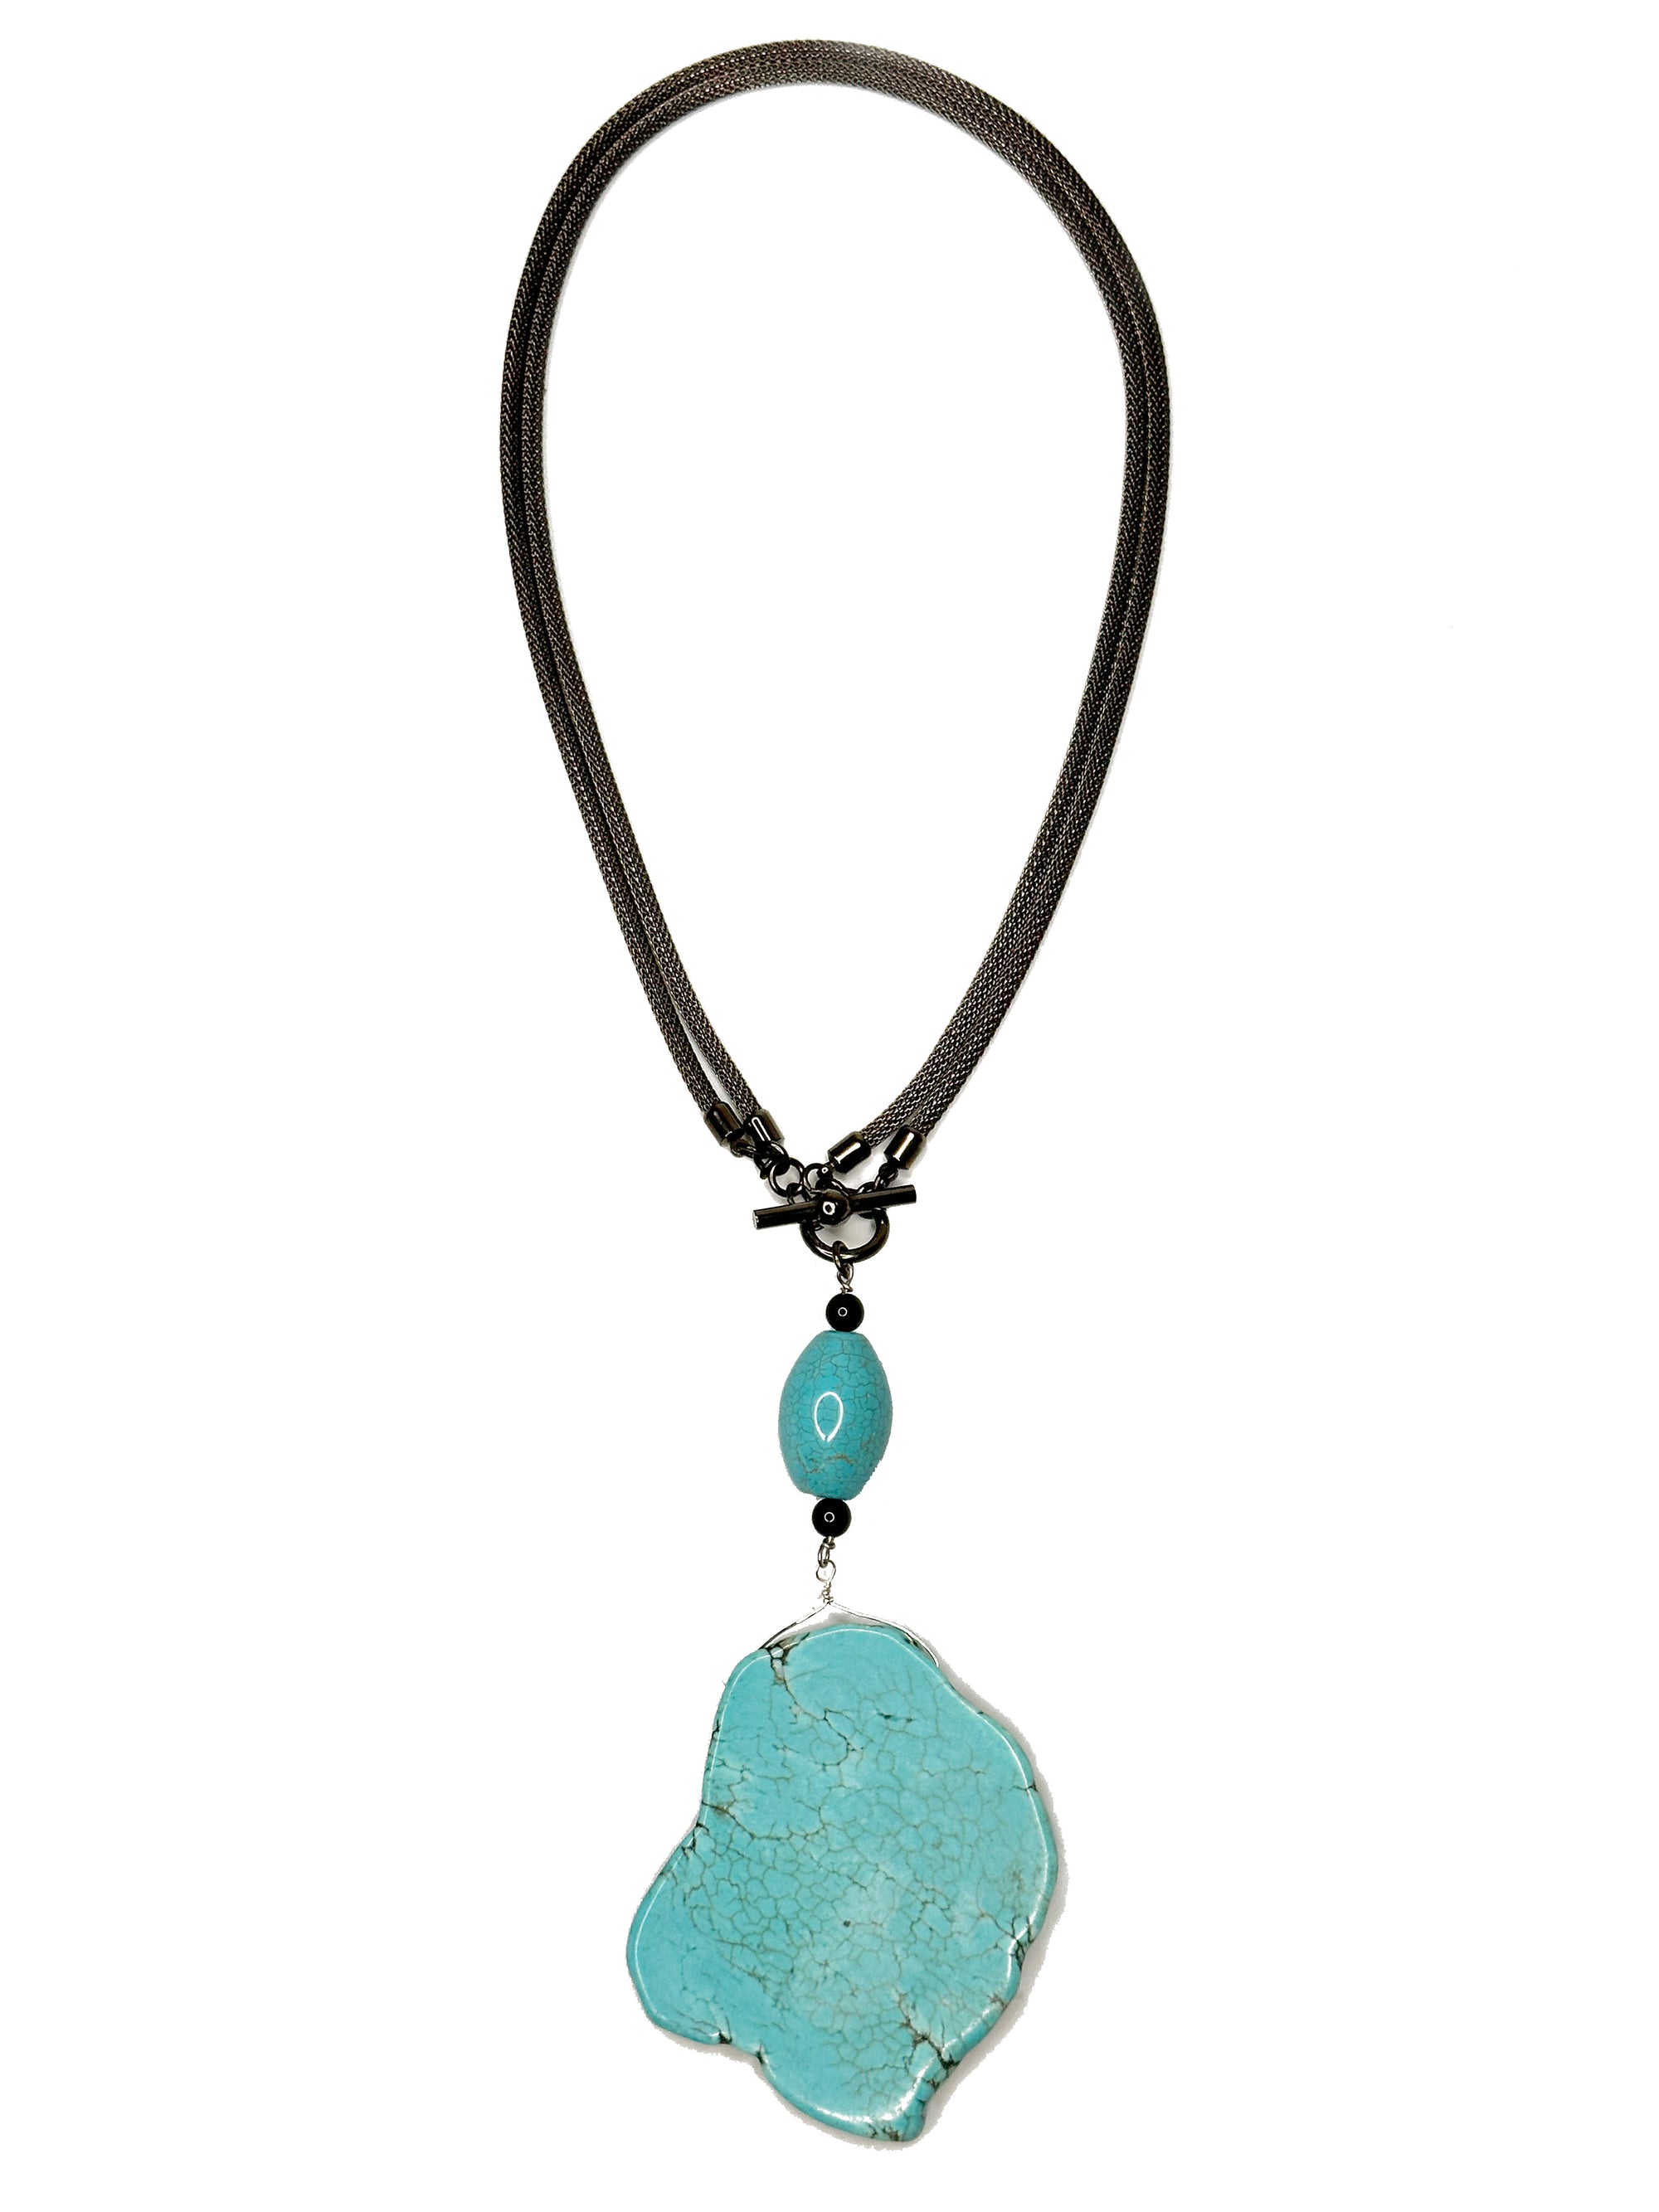 2-Way Mesh Necklace with Howlite Stone Slab